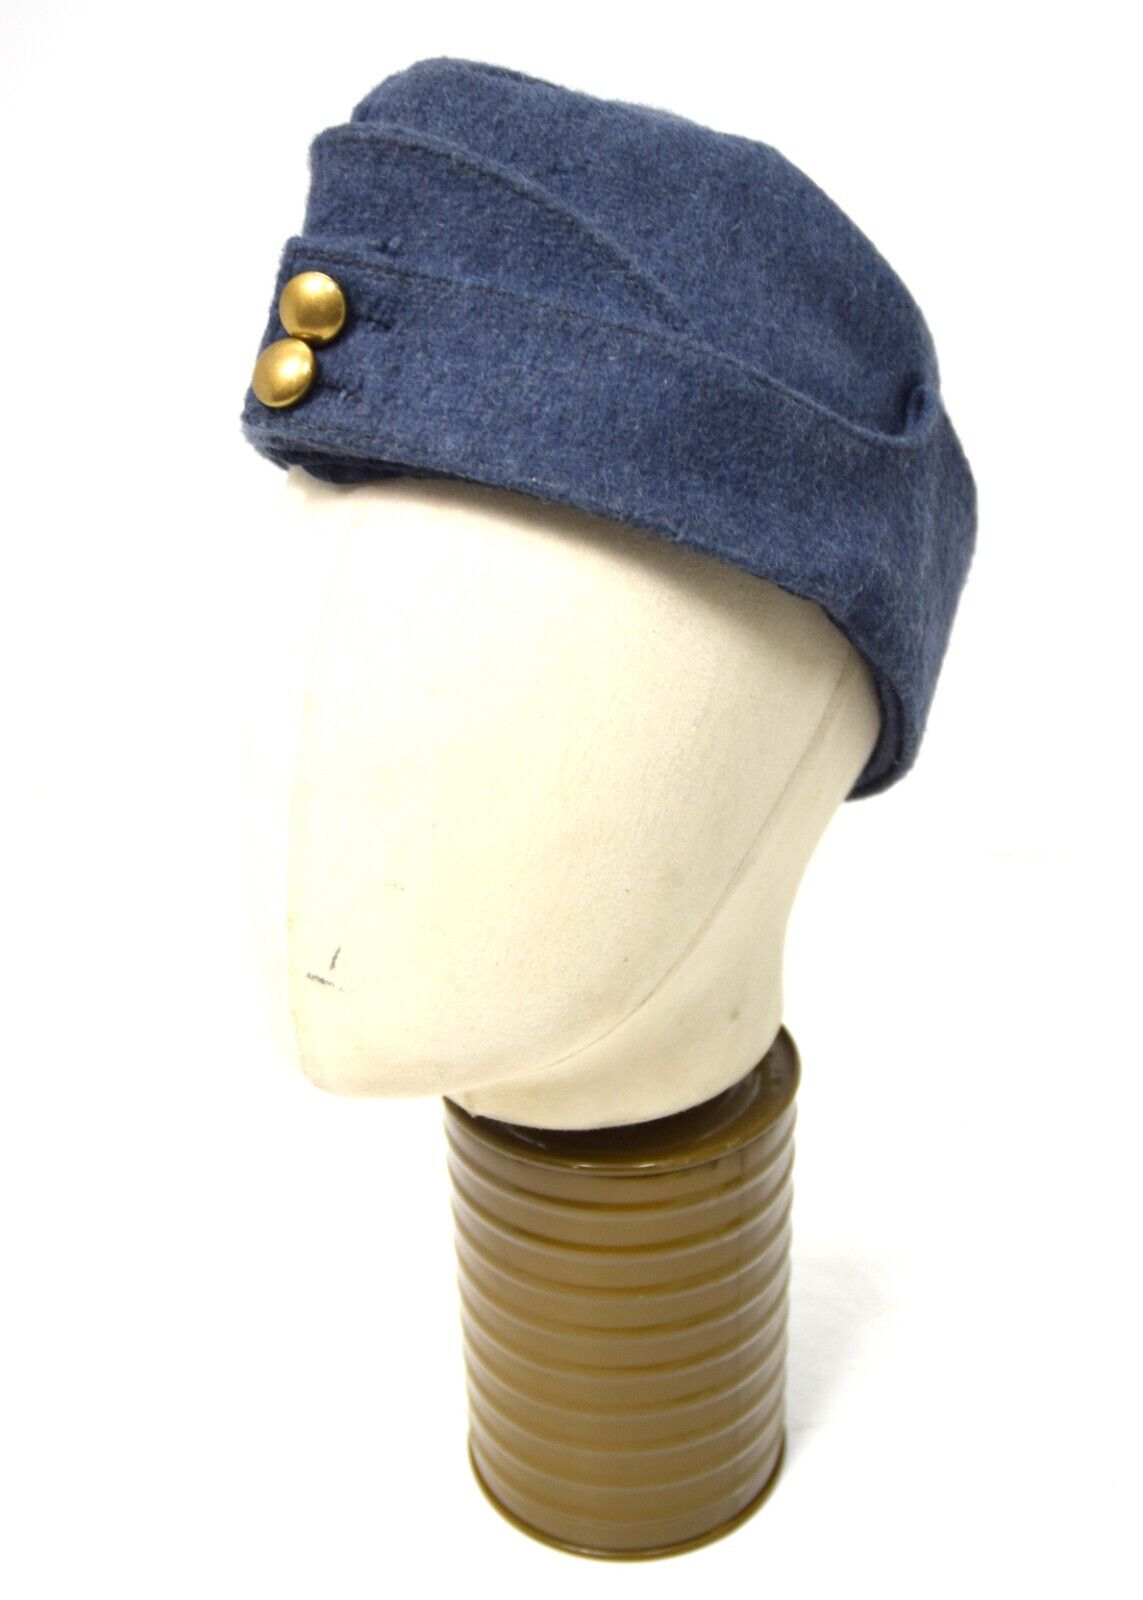 Repro RAF WW2 Wool Side Cap British Army Military Royal Air Force 1940's Hat